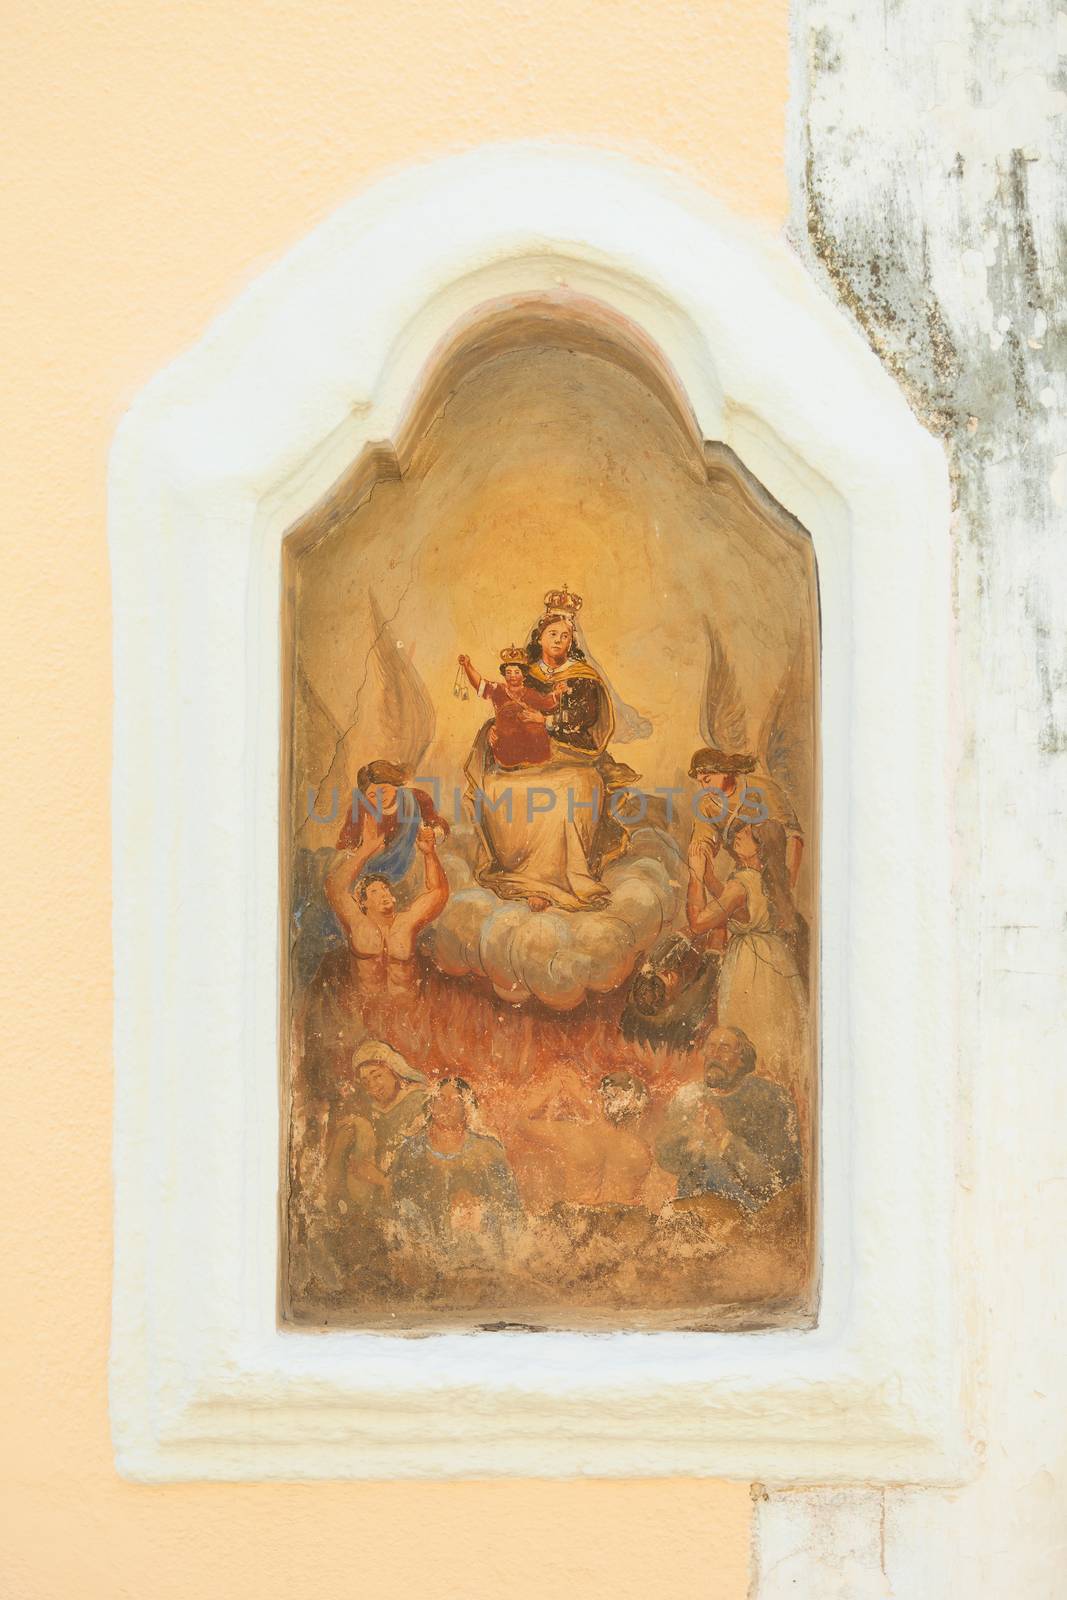 Presicce, Apulia - An old religious drawing in the streets of Pr by tagstiles.com